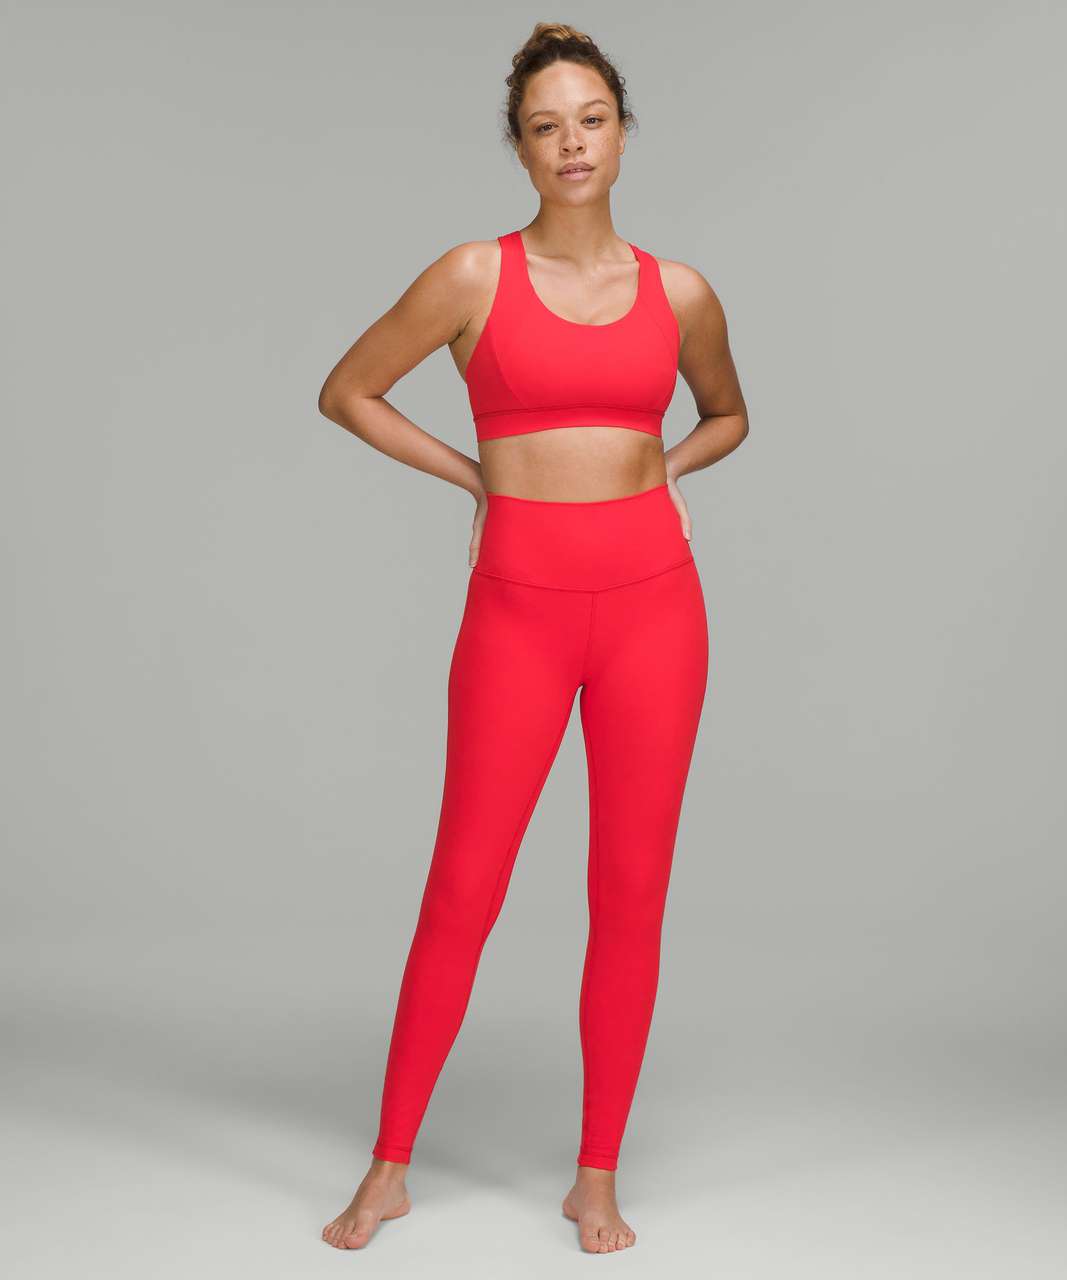 NWOT Lululemon Align Pant Size 10 Love Red Nulu 25 Double Lined